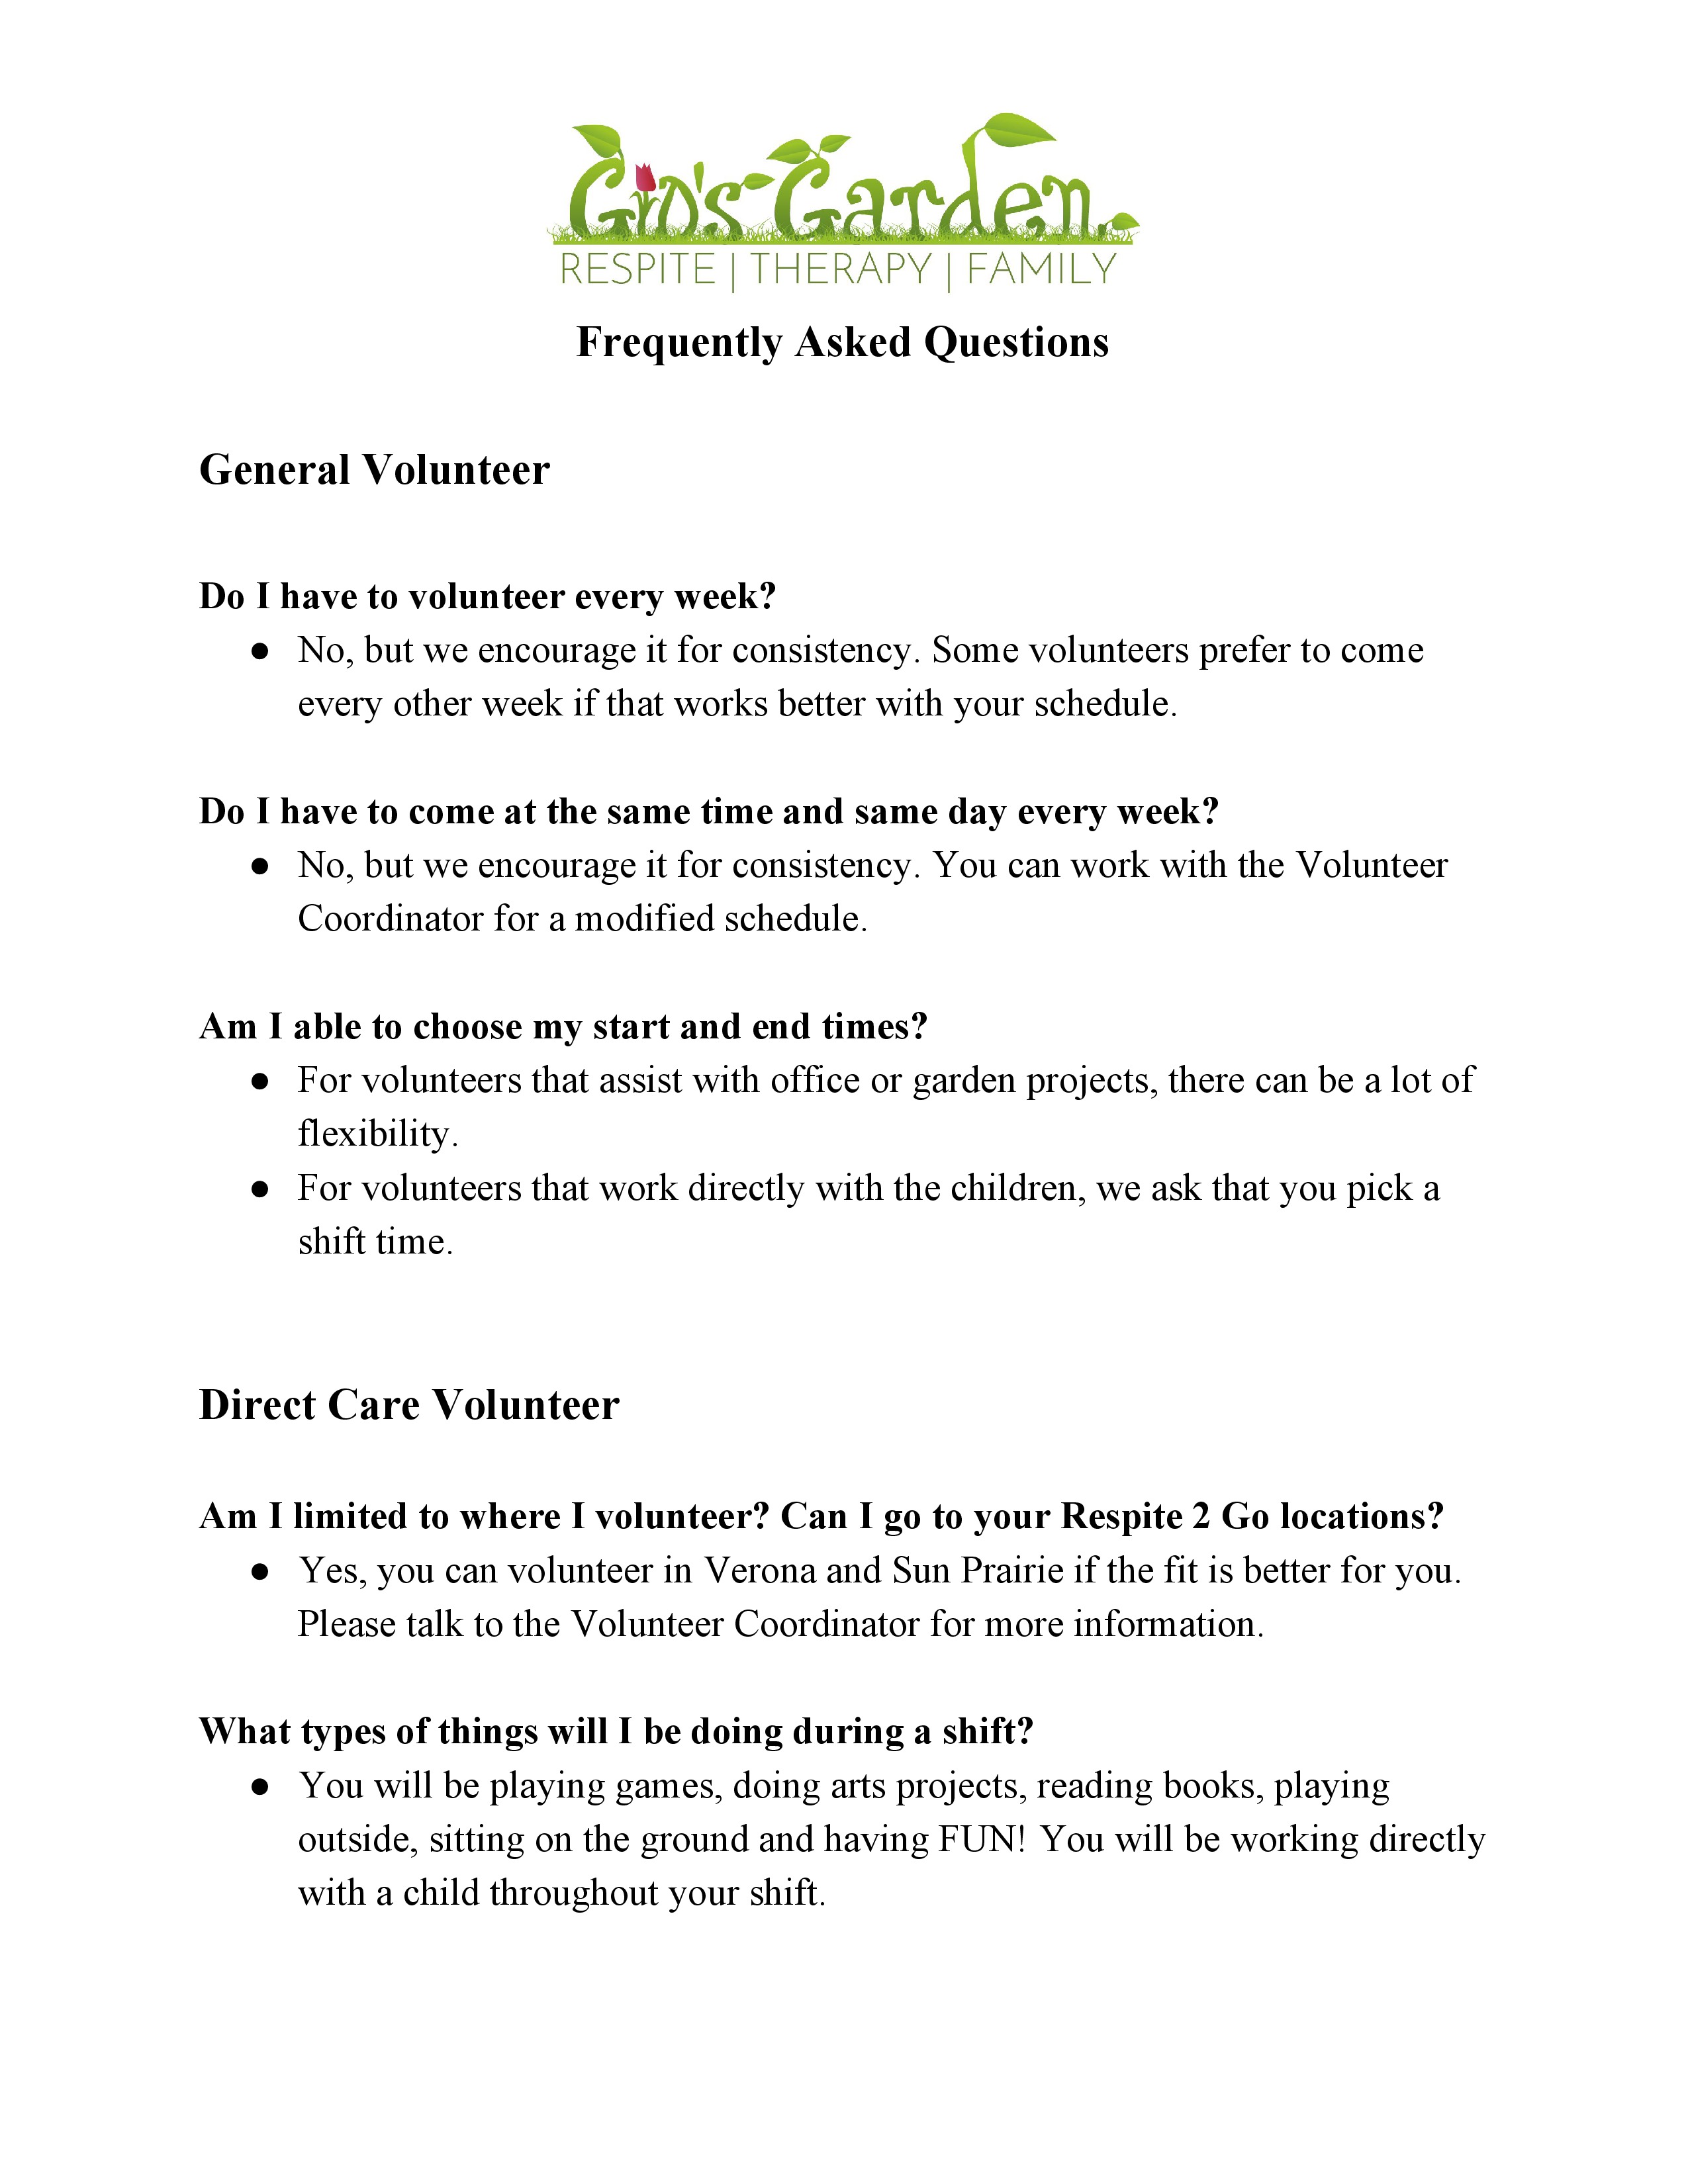 FAQS for Volunteers_Interns-page-0